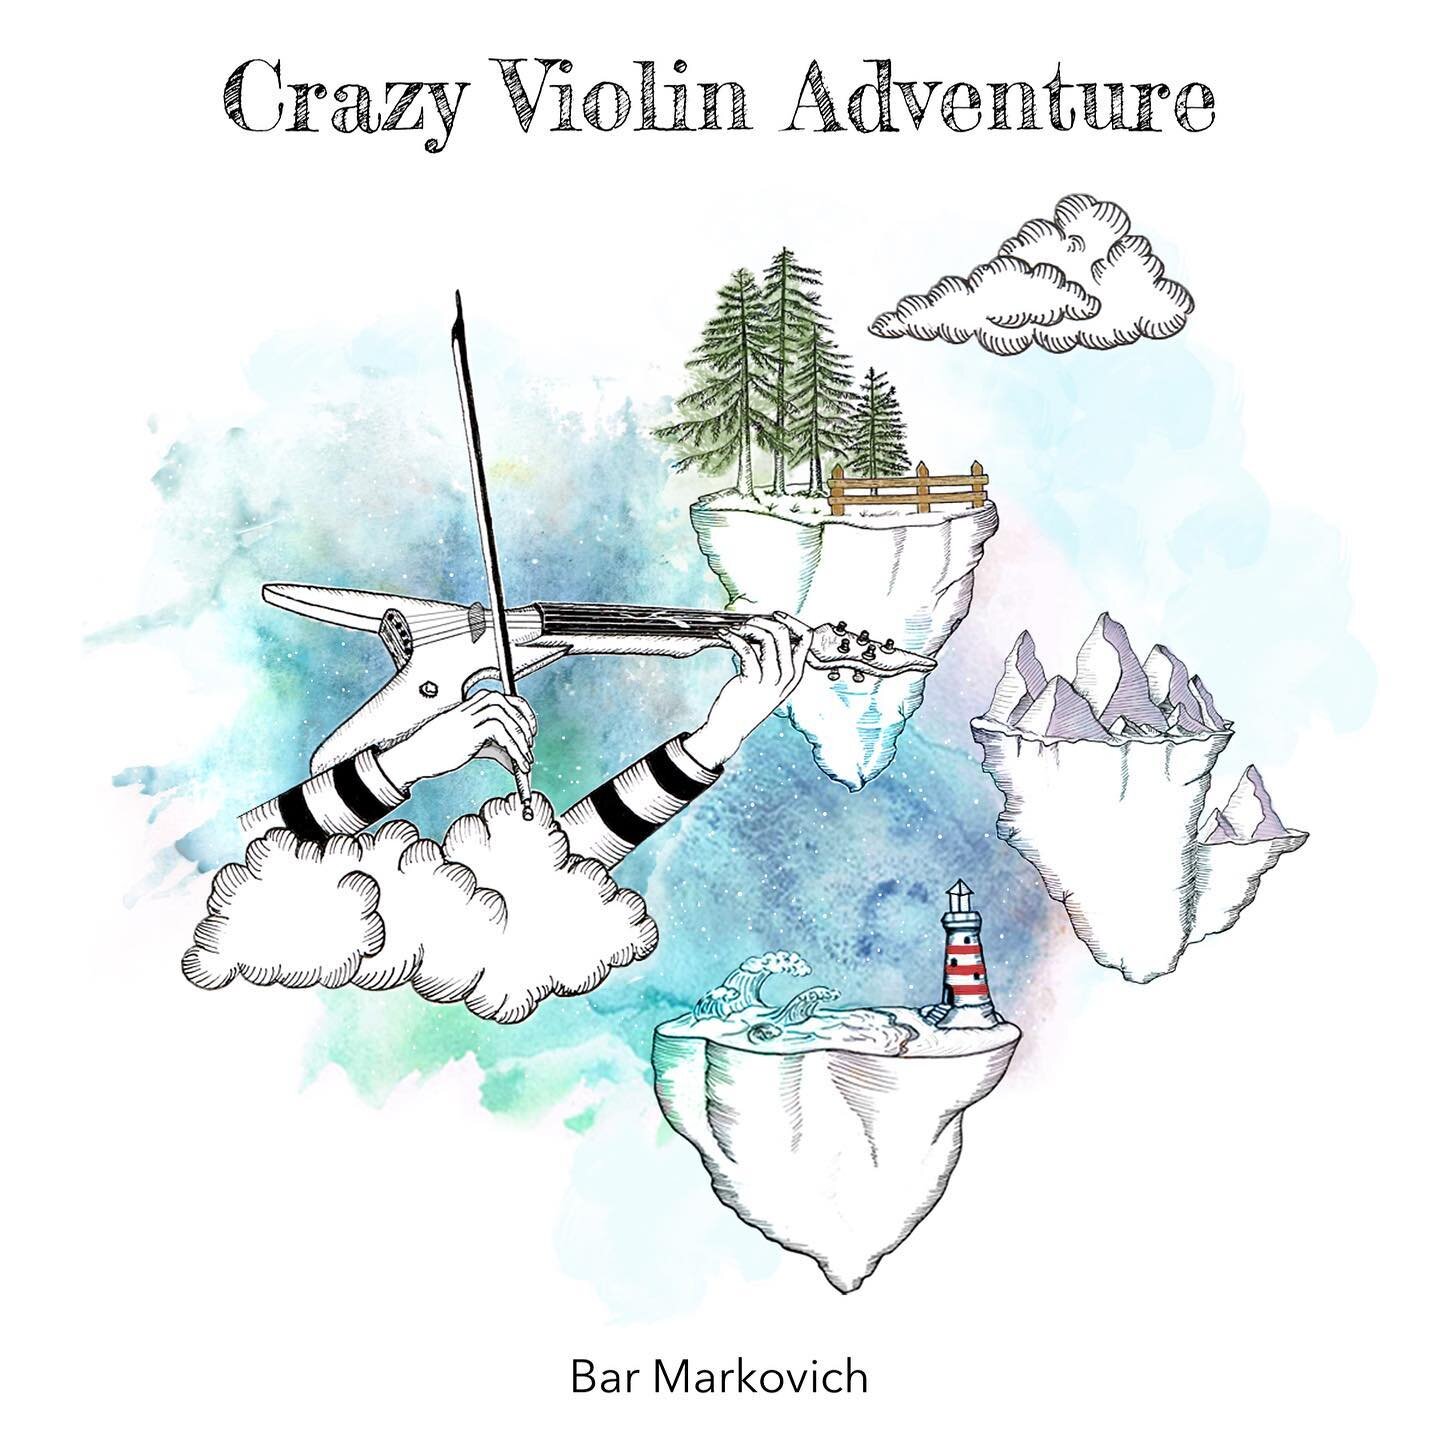 So excited for the official release of my single &ldquo;Crazy Violin Adventure&rdquo; this coming Friday! Comment YES if you&rsquo;re excited too ☺️🎻
.
I&rsquo;m also very excited to share with you the gorgeous artwork of it, made by the talented @m